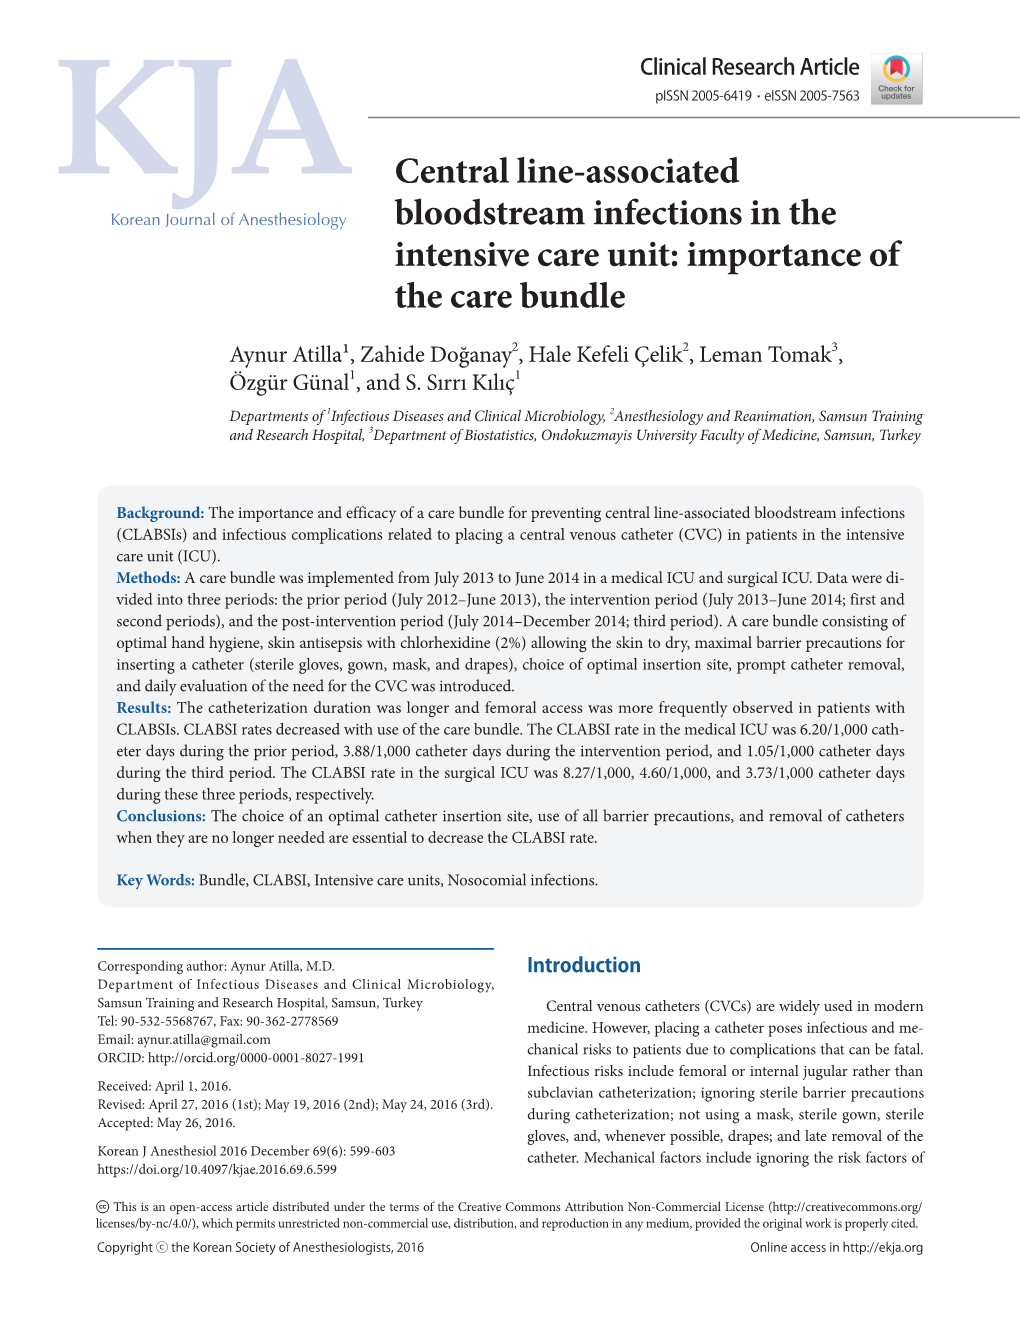 Central Line-Associated Bloodstream Infections in The